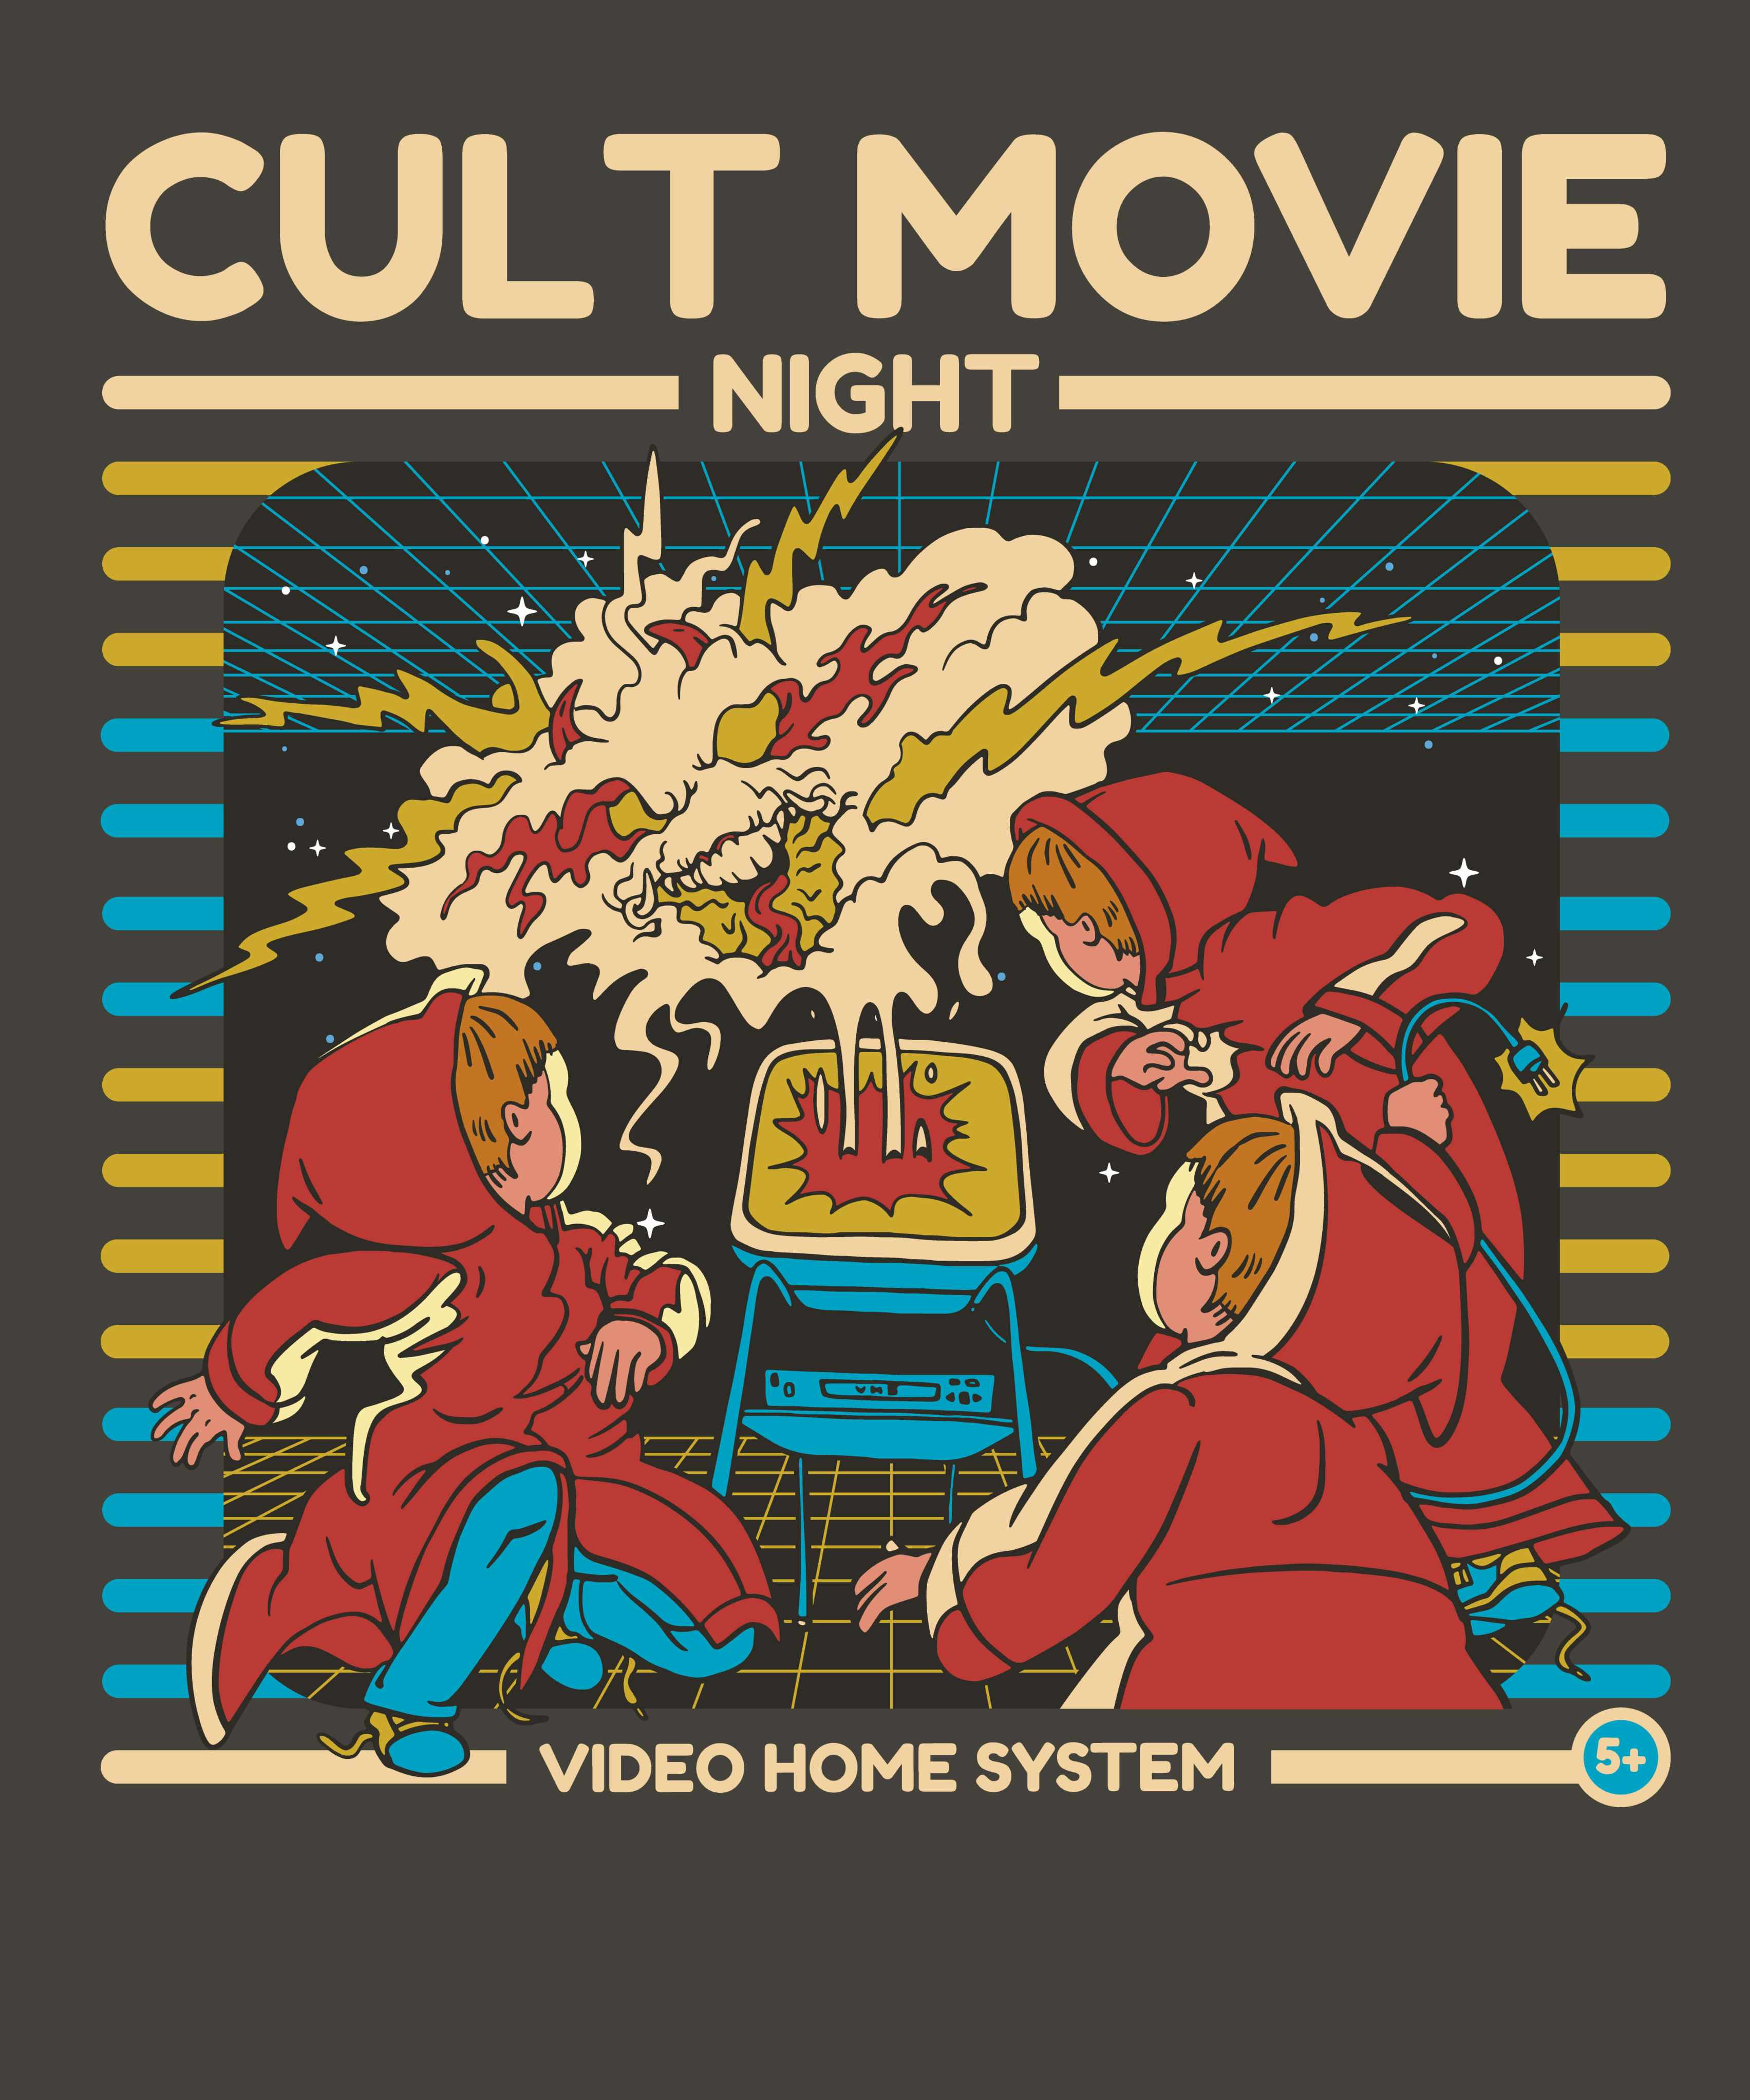 One Tee Project's Cult Movie Night video home system.